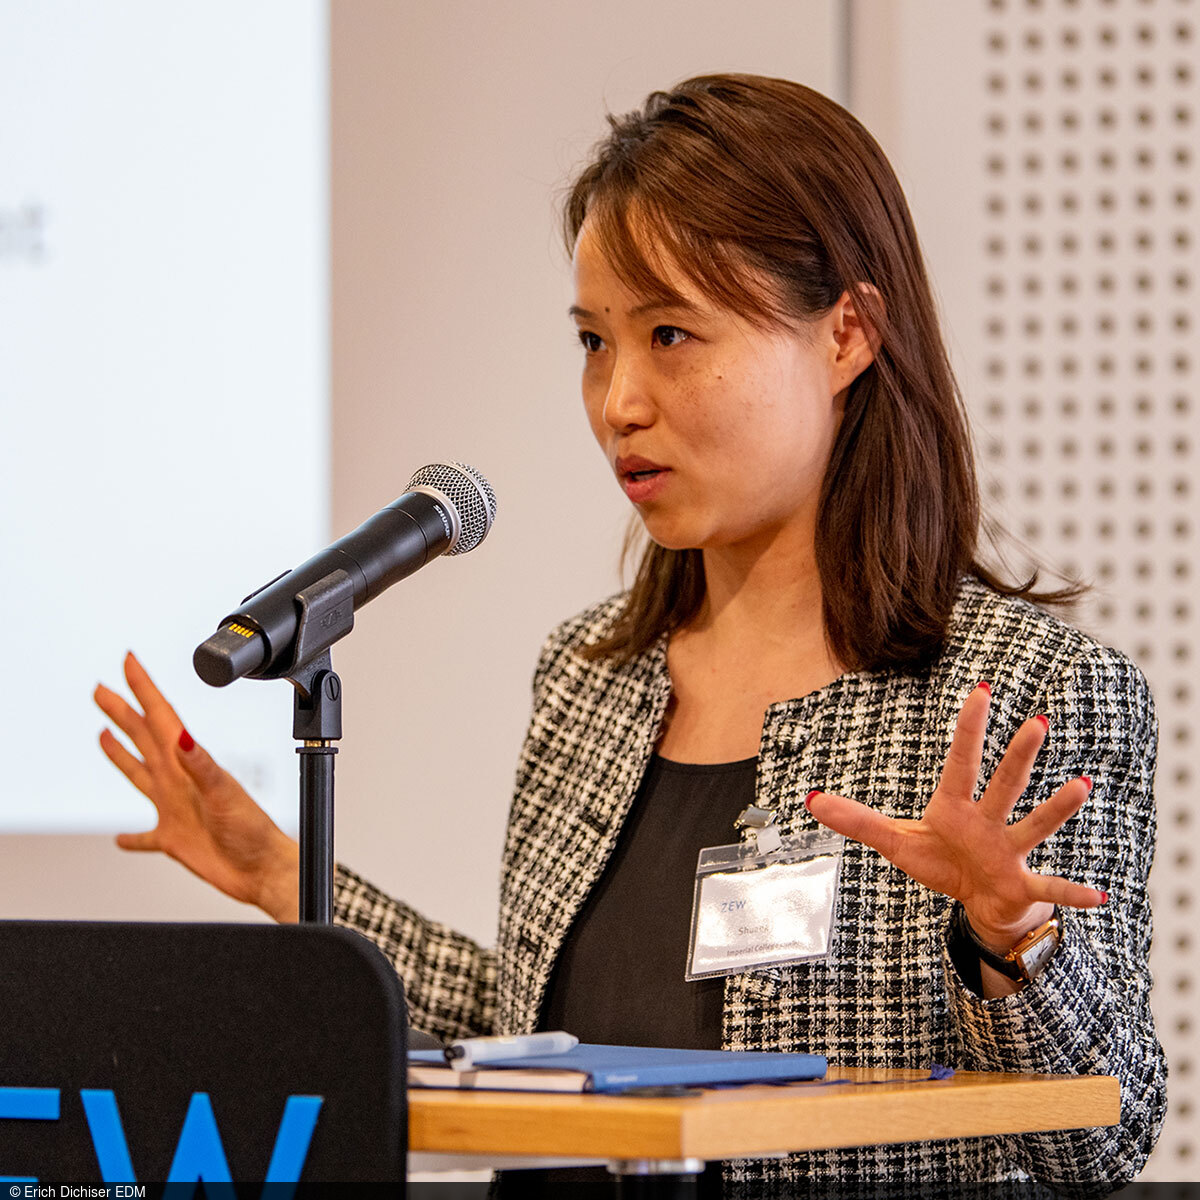 Professor Shuang Zhang sproke at the eleventh Mannheim Conference on Energy and the Environment at ZEW.